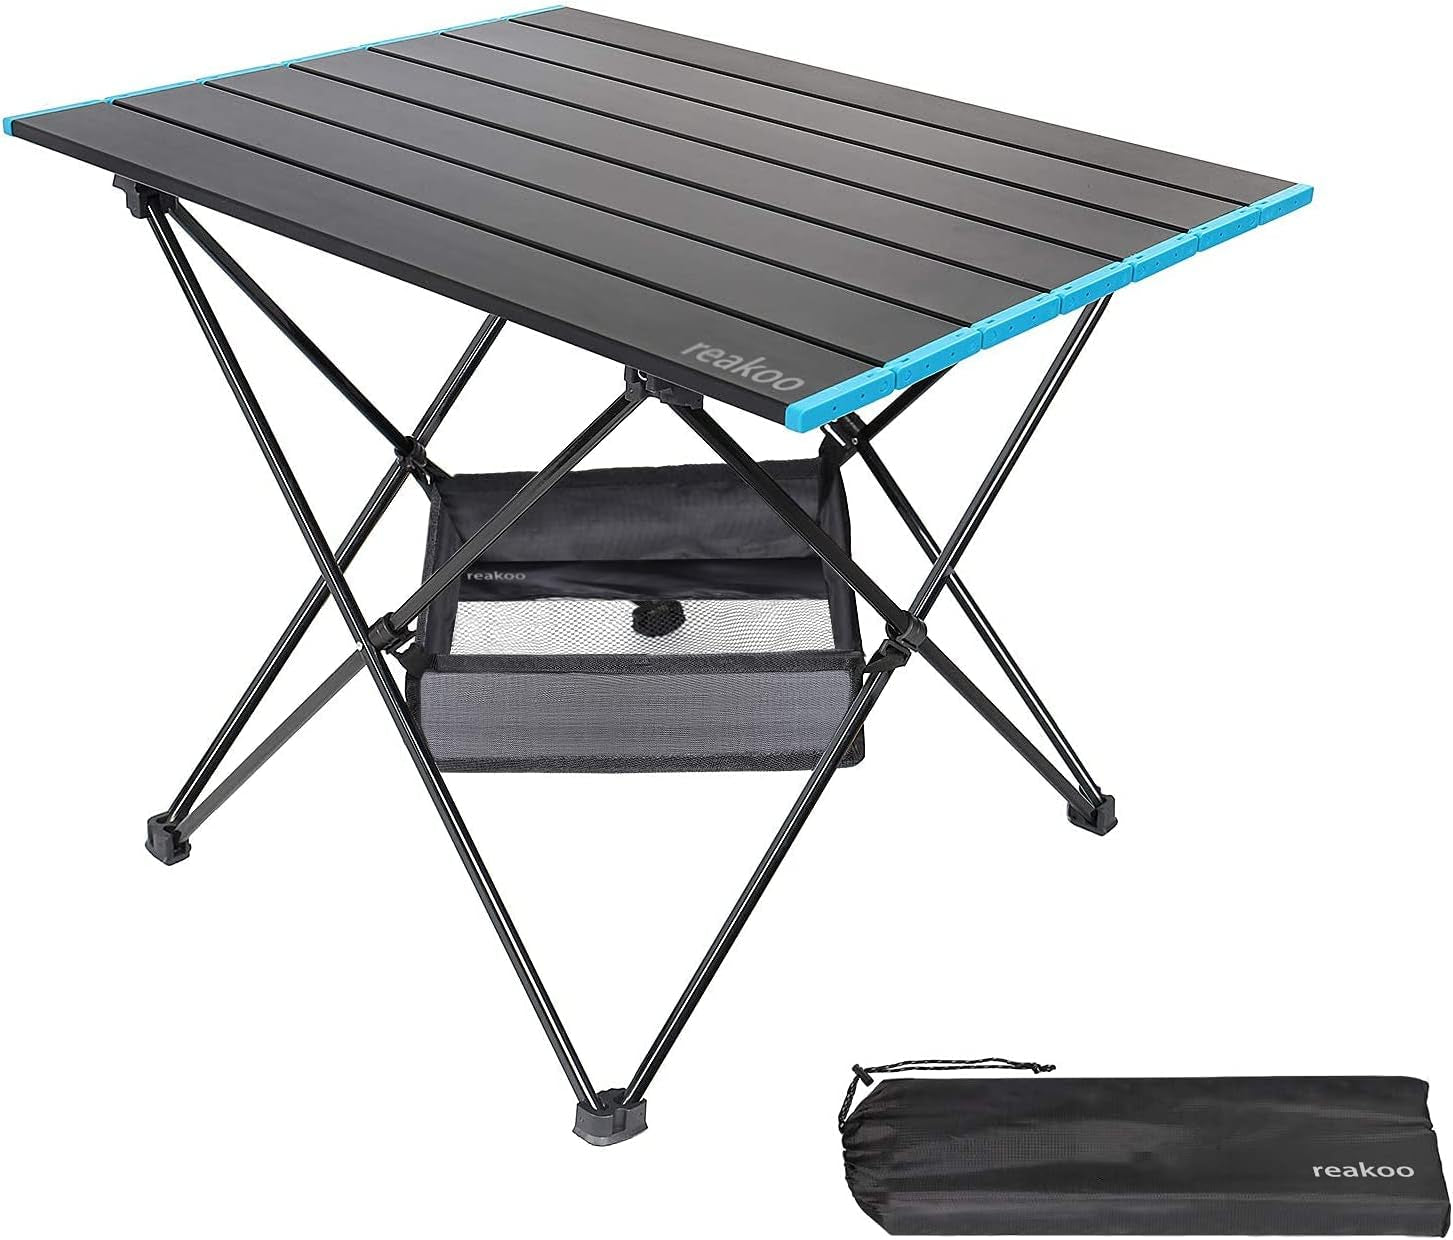  Portable Camping Table: Lightweight Aluminum Tabletop with Carry Bag for Outdoor, BBQ, Picnic, Cooking, Hiking, Fishing